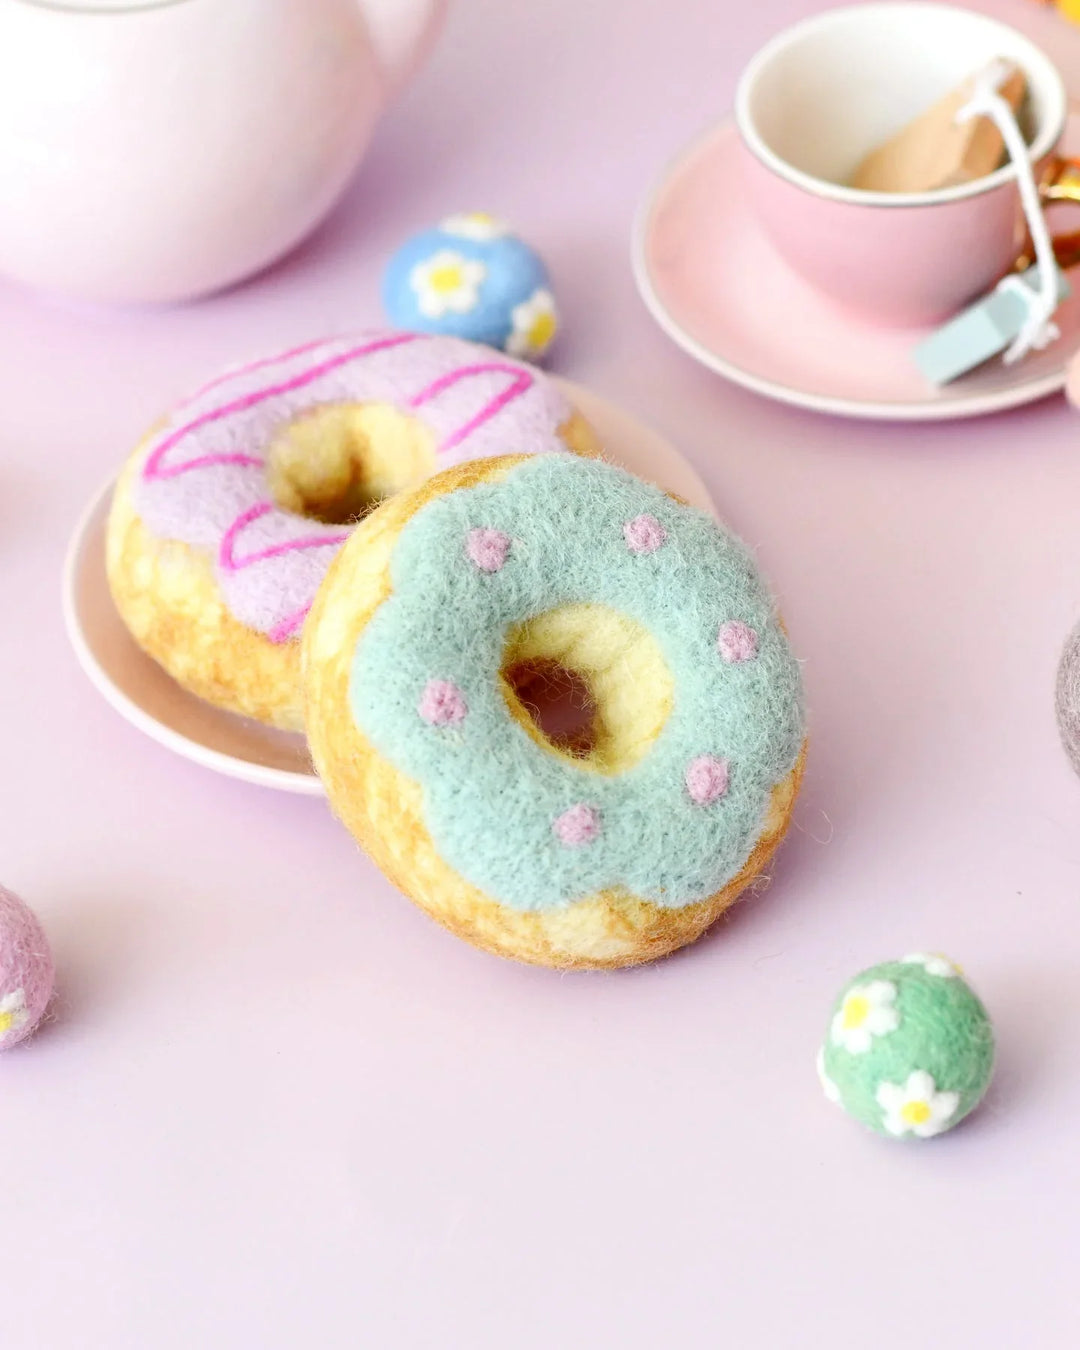 Felt Play Food | Doughnut With Pastel Frosting And Pink Drizzle